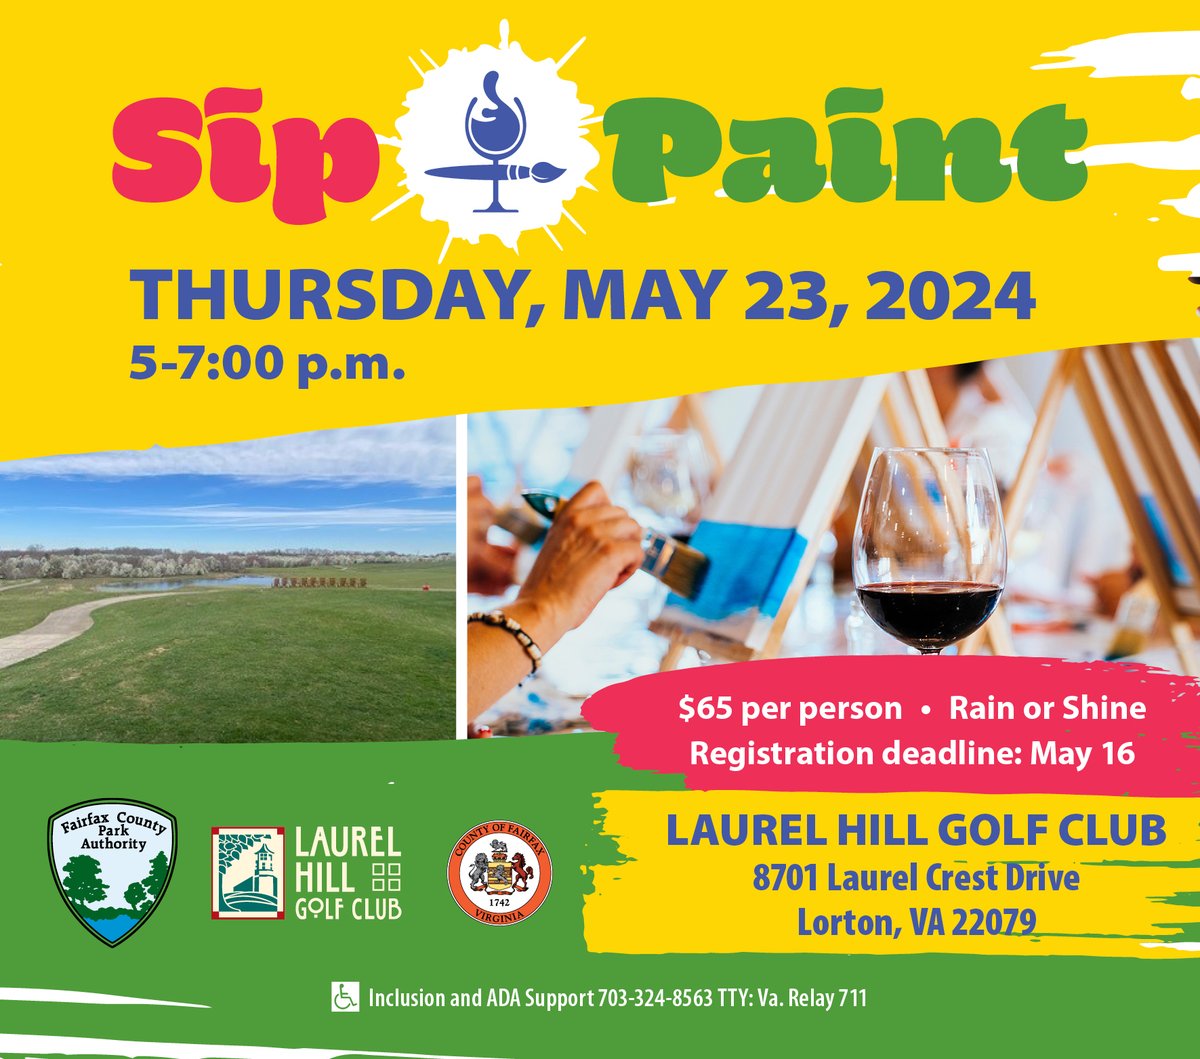 Unleash your inner artist at our Sip and Paint event at Laurel Hill Golf Club on Thursday, May 23! 🎨 🍷 Join us for a relaxing evening of creativity, drinks and fun! Registration closes on May 16. Sign up online ($65 per person): bit.ly/3U3DY1B